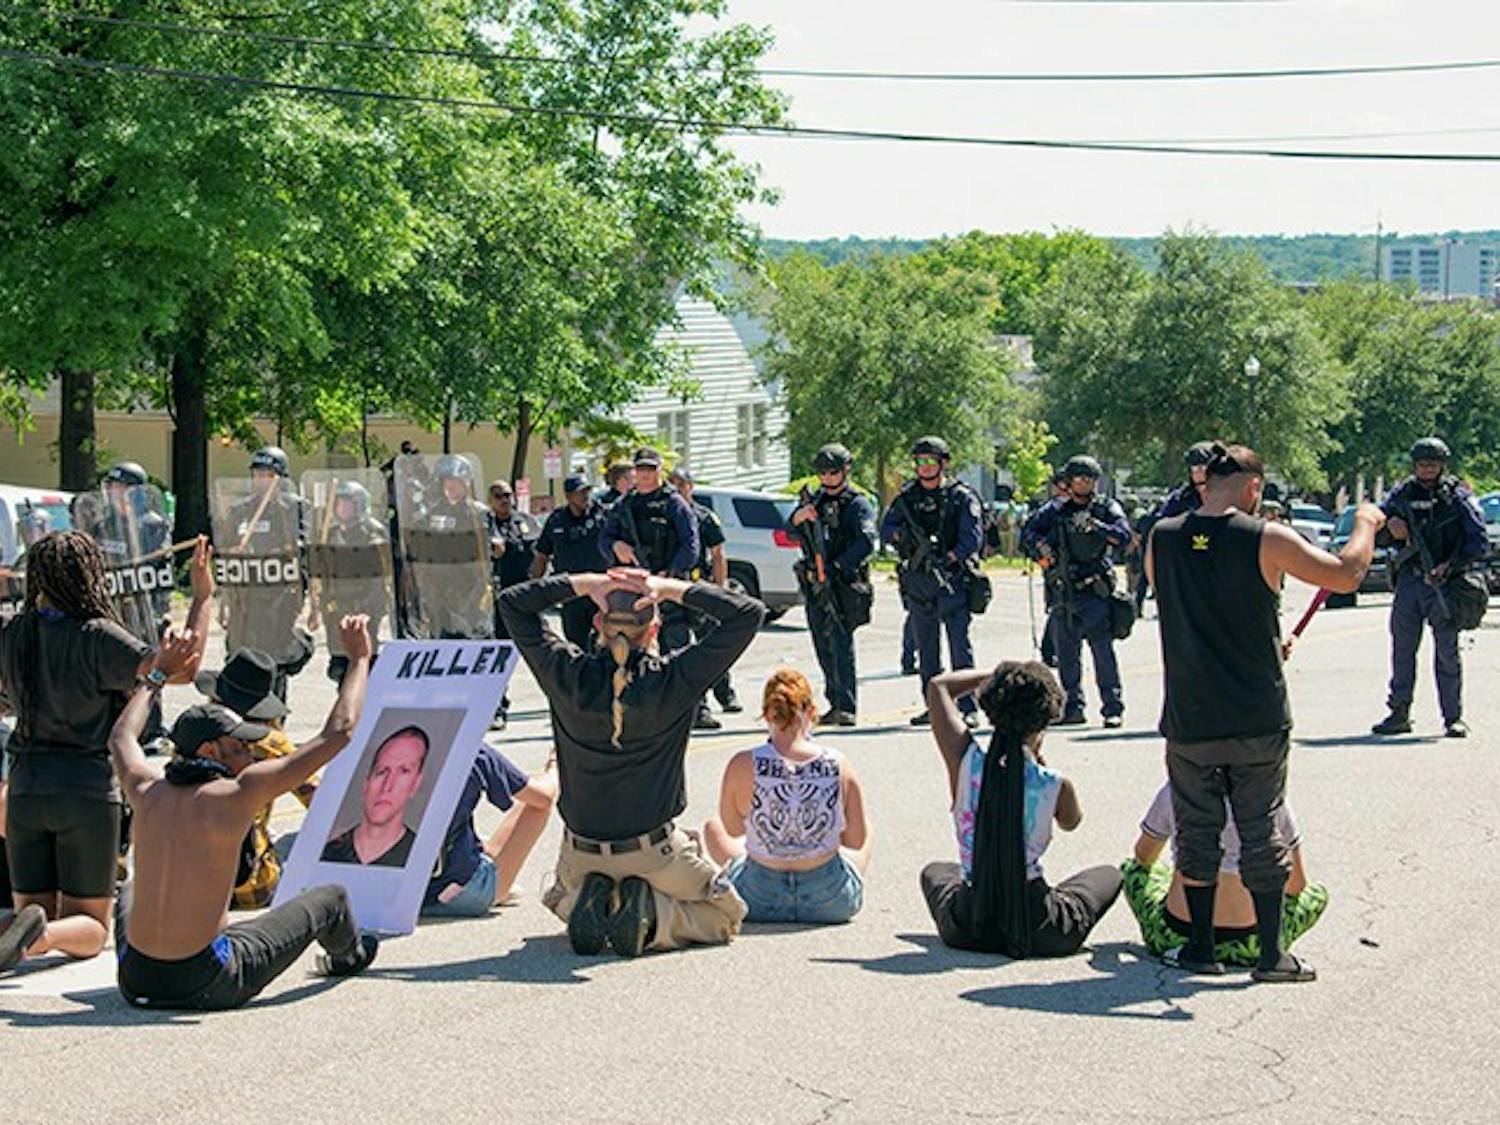 Protesters kneel across from a line of armed police officers in front of the Columbia Municipal Court at the “I Can’t Breathe” protest on May 30.